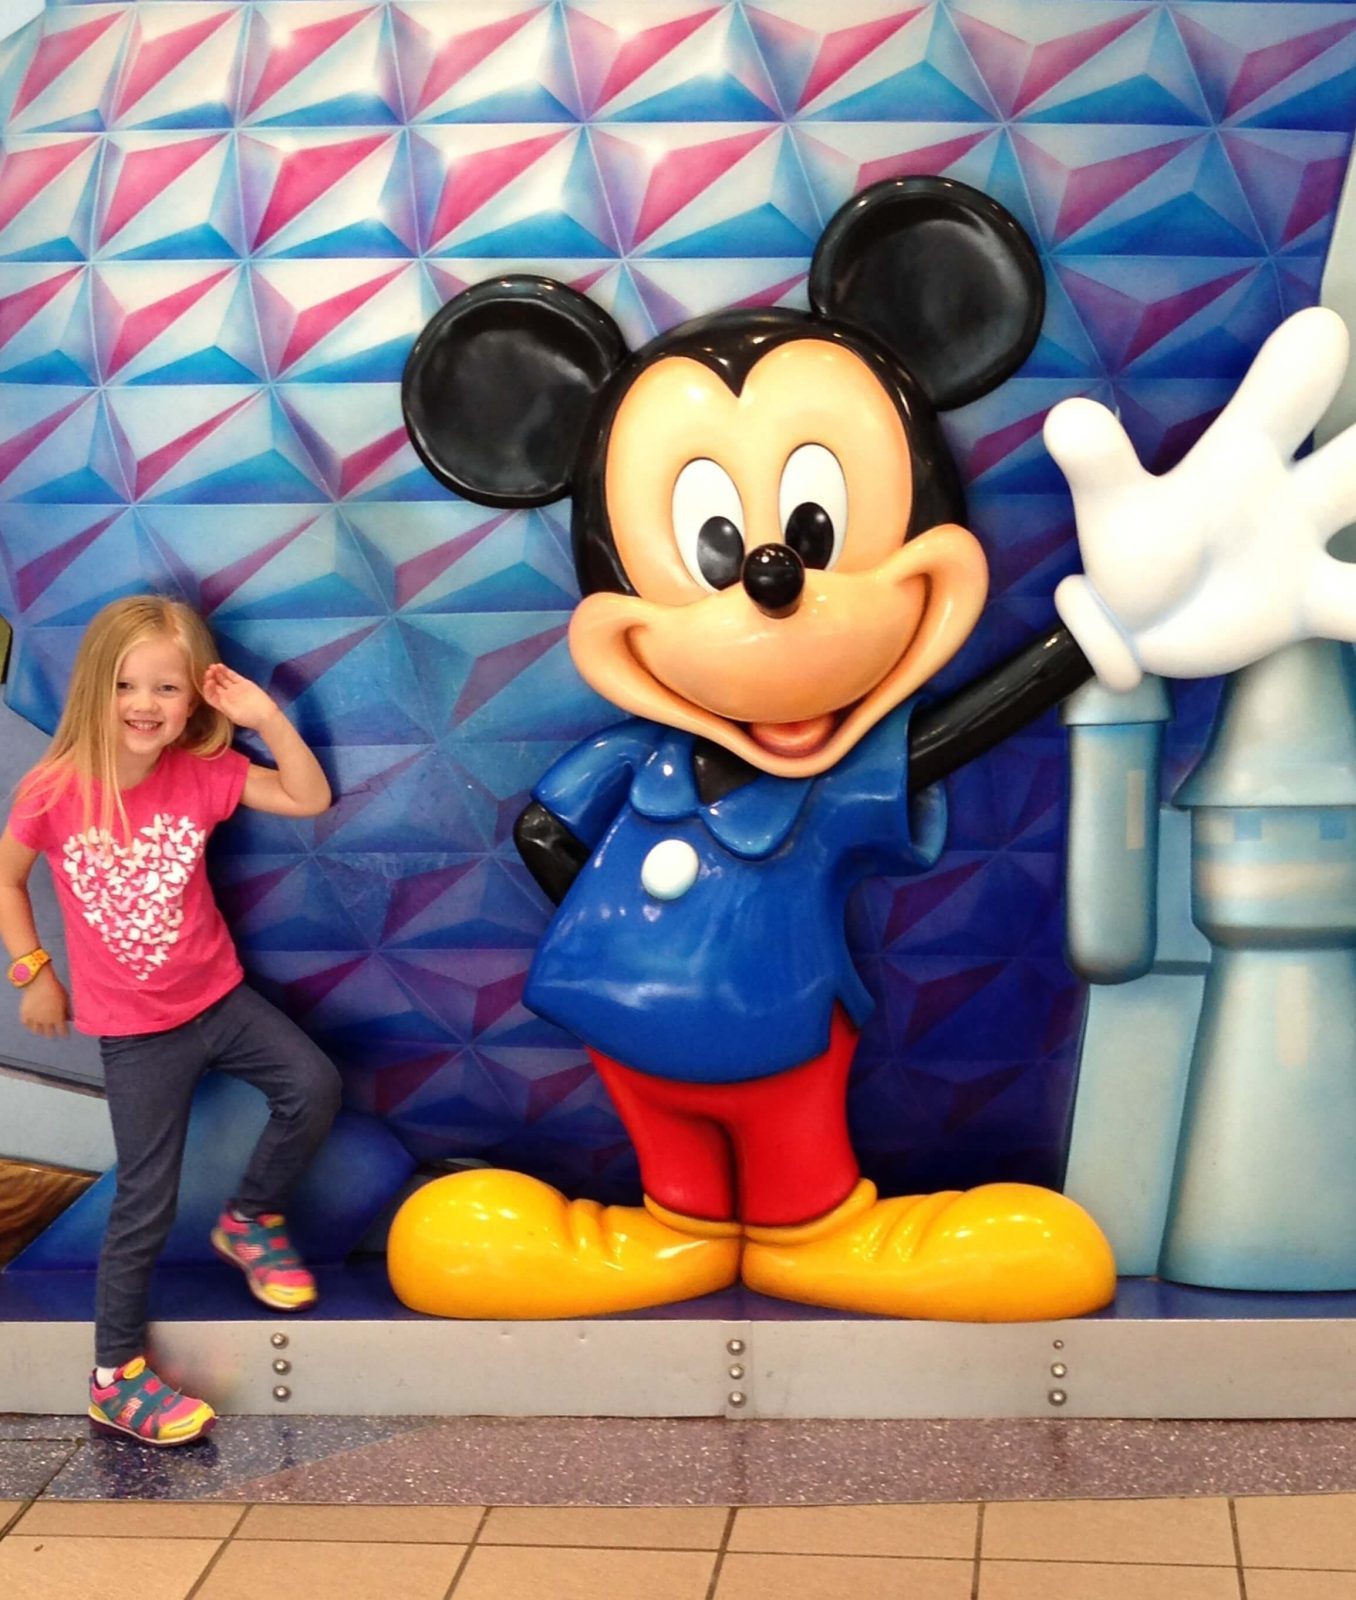 little girl posing next to mickey mouse statue at airport